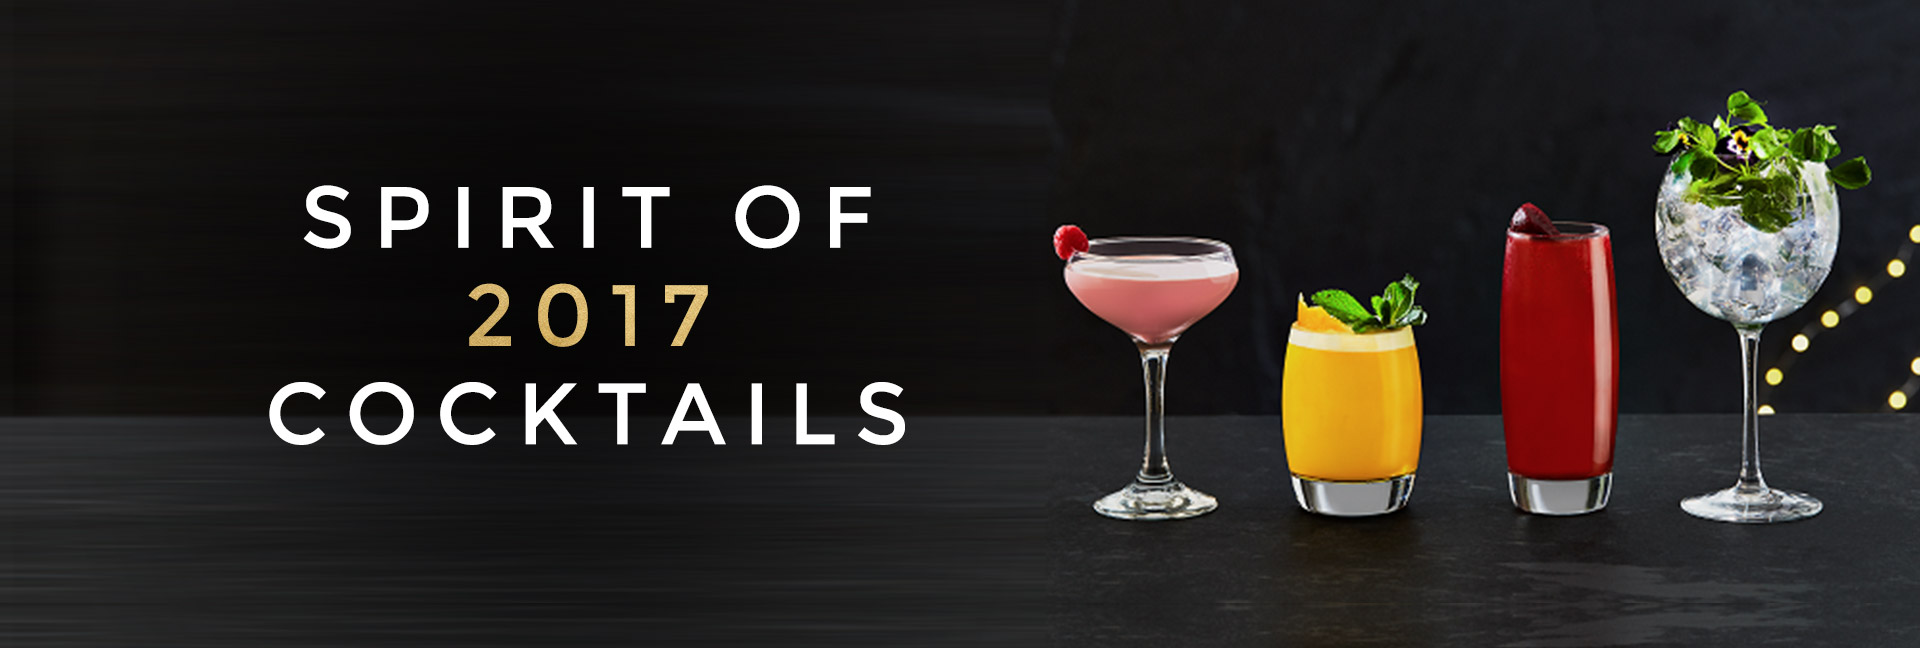 Spirit of 2017 cocktails at All Bar One Charing Cross